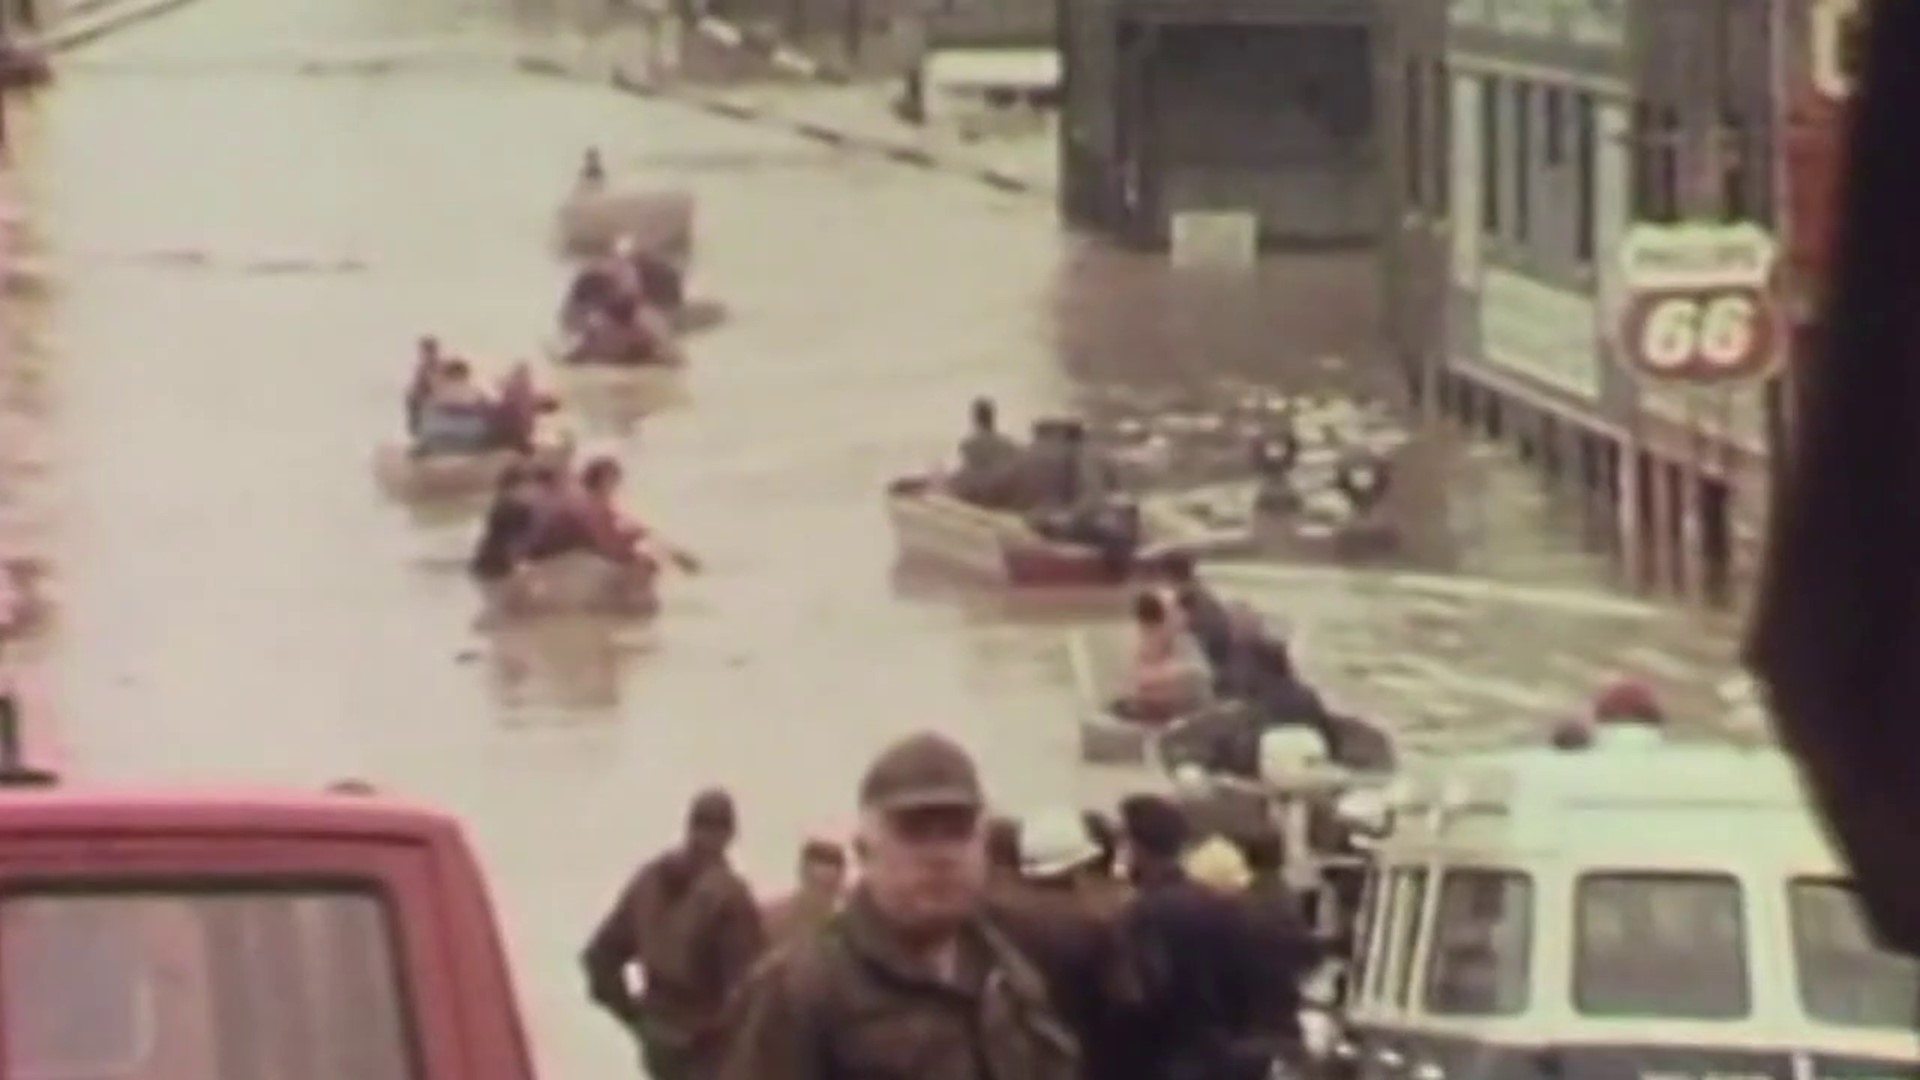 50 years ago, frantic efforts were made to get more than 100,000 people evacuated from the Wyoming Valley fearing levees wouldn’t hold after unprecedented rain.